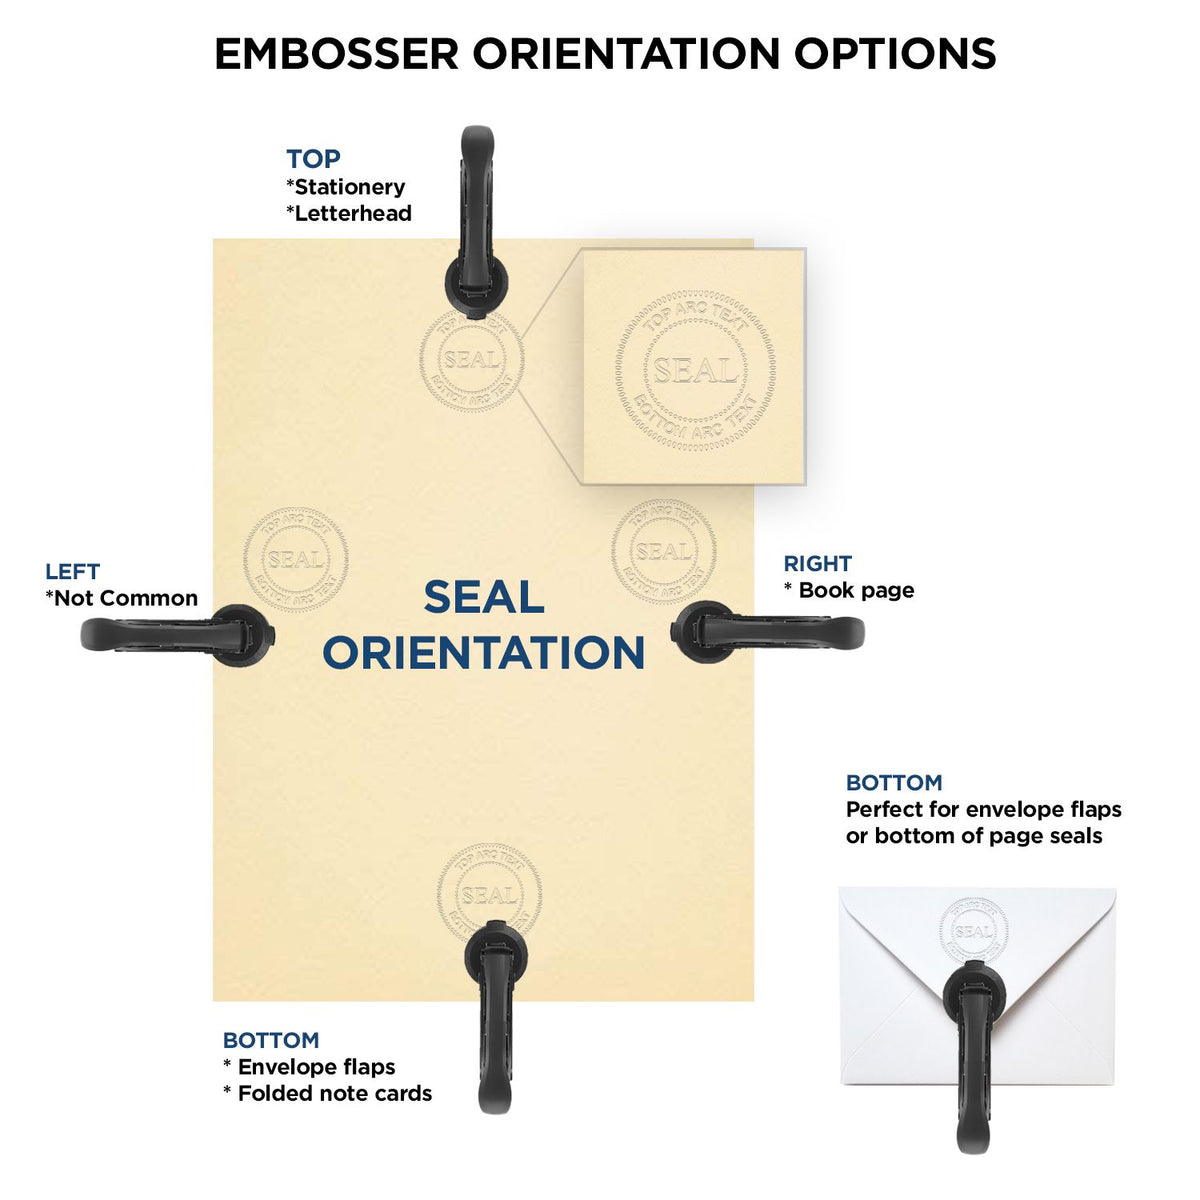 An infographic for the Gift Maine Land Surveyor Seal showing embosser orientation, this is showing examples of a top, bottom, right and left insert.